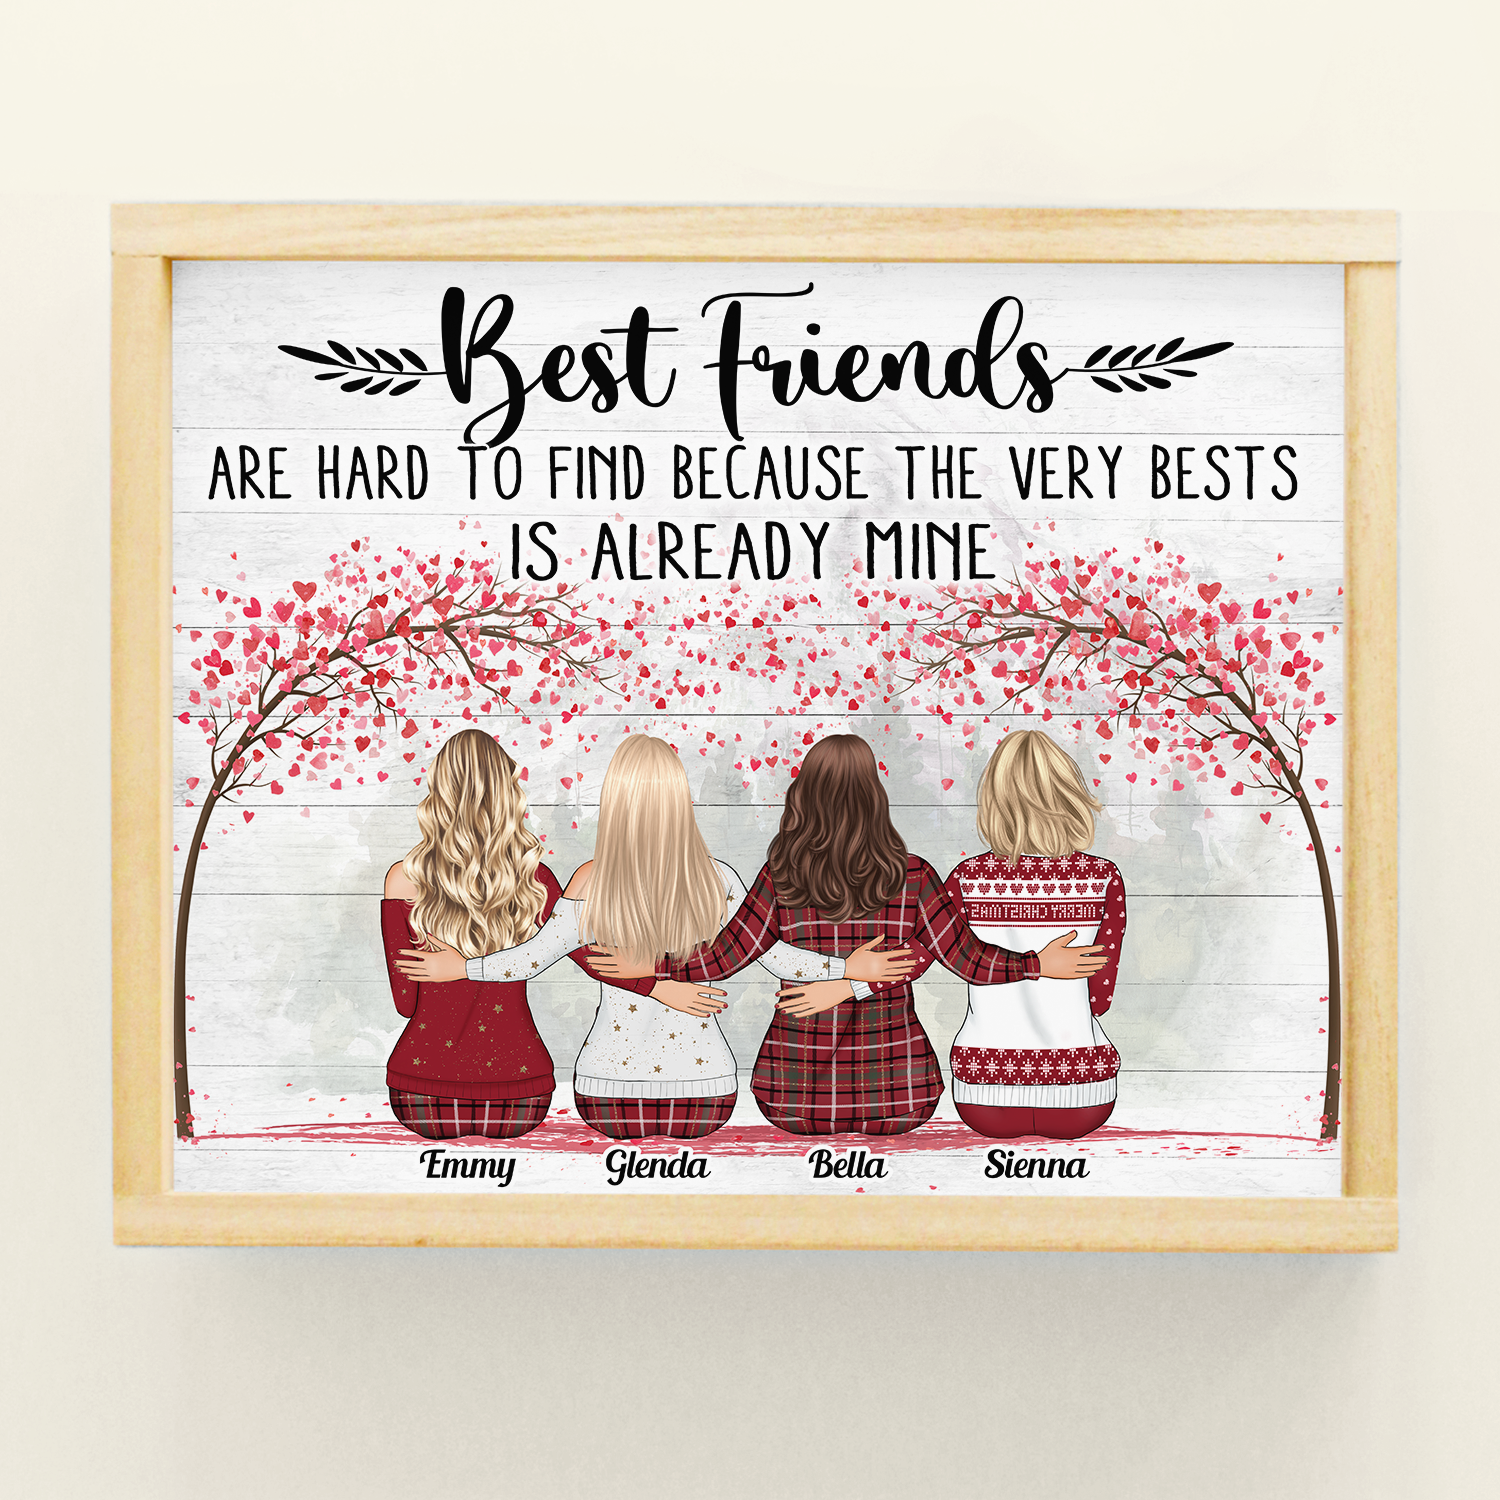 Best Friends Are Hard To Find The Bests Are Already Mine Pink Tree - Personalized Poster - Christmas Gift For Friends, Besties - Family Hugging